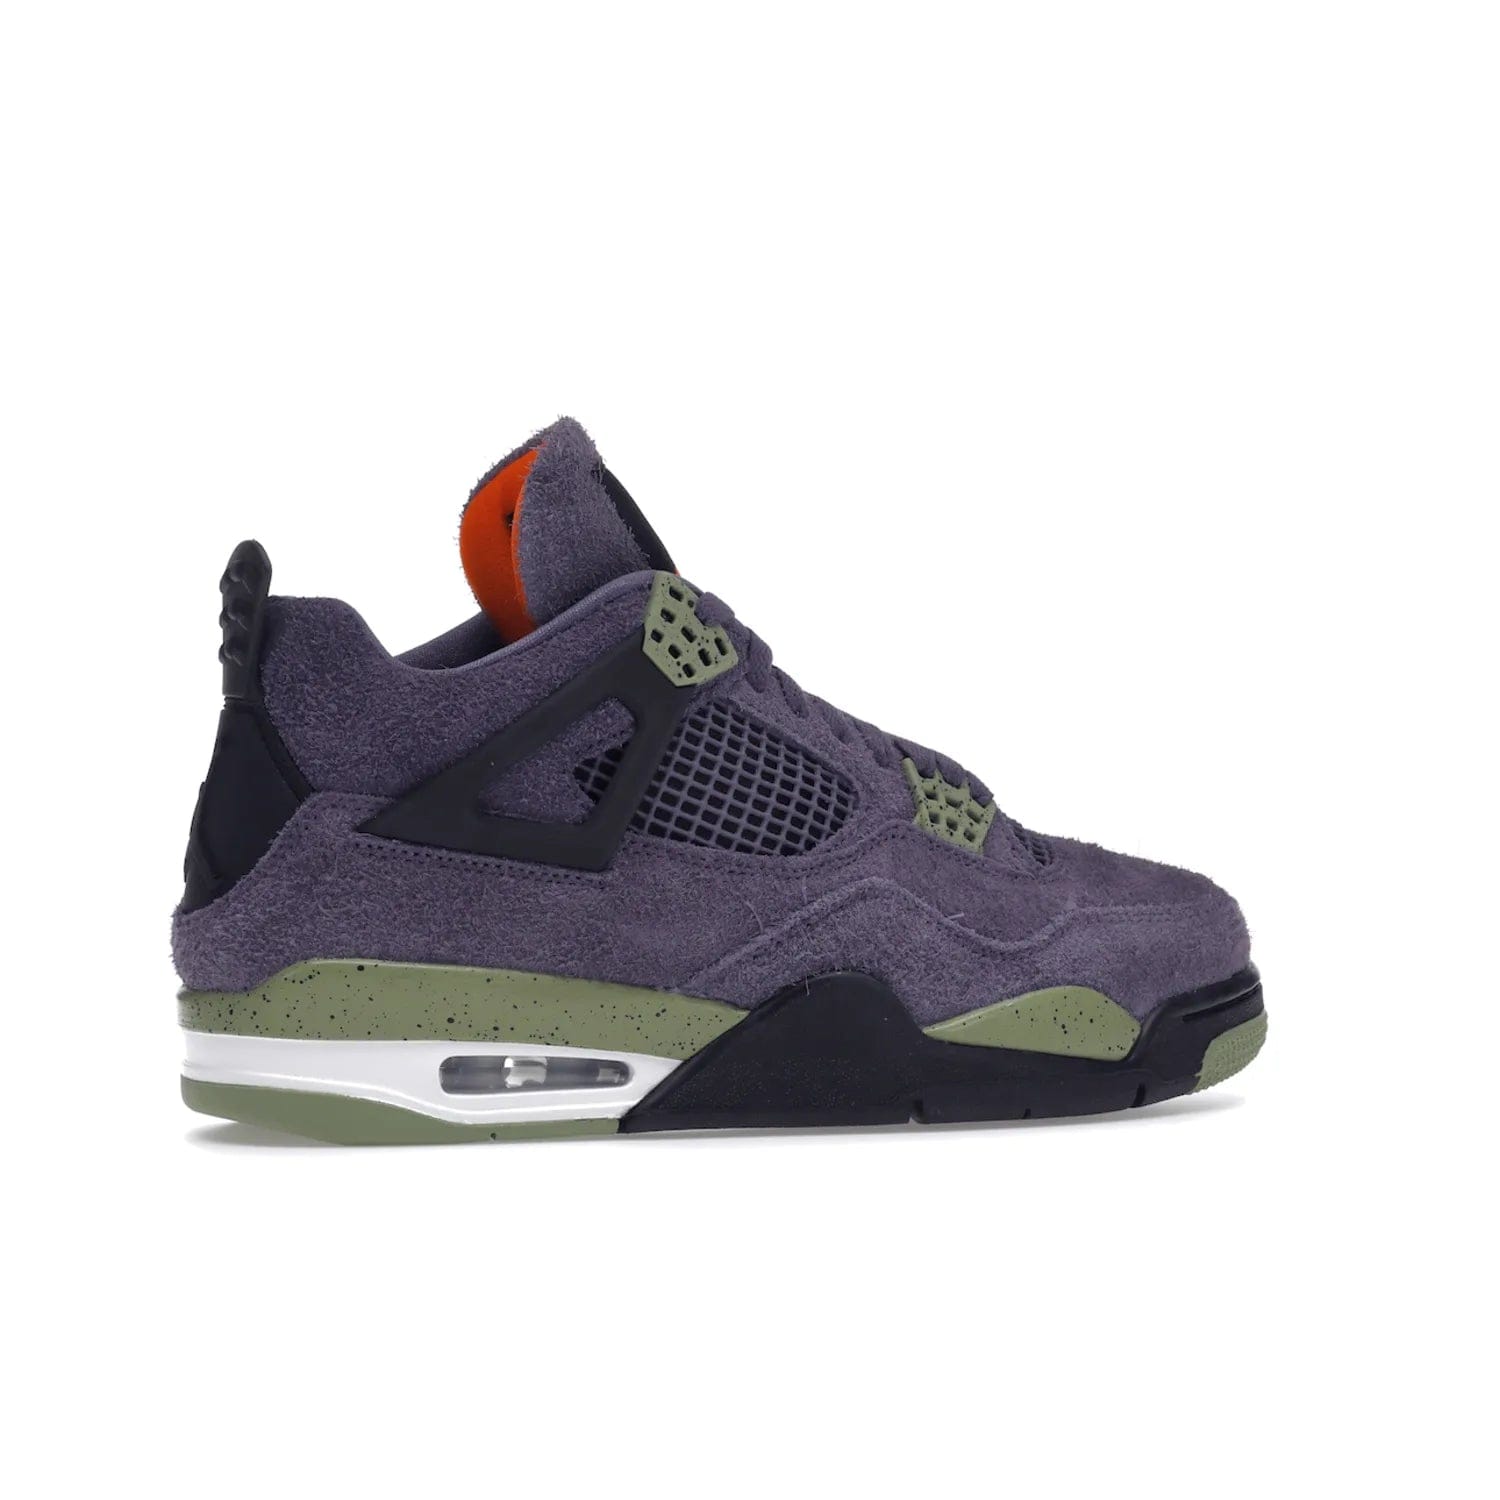 Jordan 4 Retro Canyon Purple (Women's) - Image 35 - Only at www.BallersClubKickz.com - New Air Jordan 4 Retro Canyon Purple W sneaker features shaggy purple suede, lime highlights & safety orange Jumpman branding. Classic ankle-hugging silhouette with modern colors released 15/10/2022.